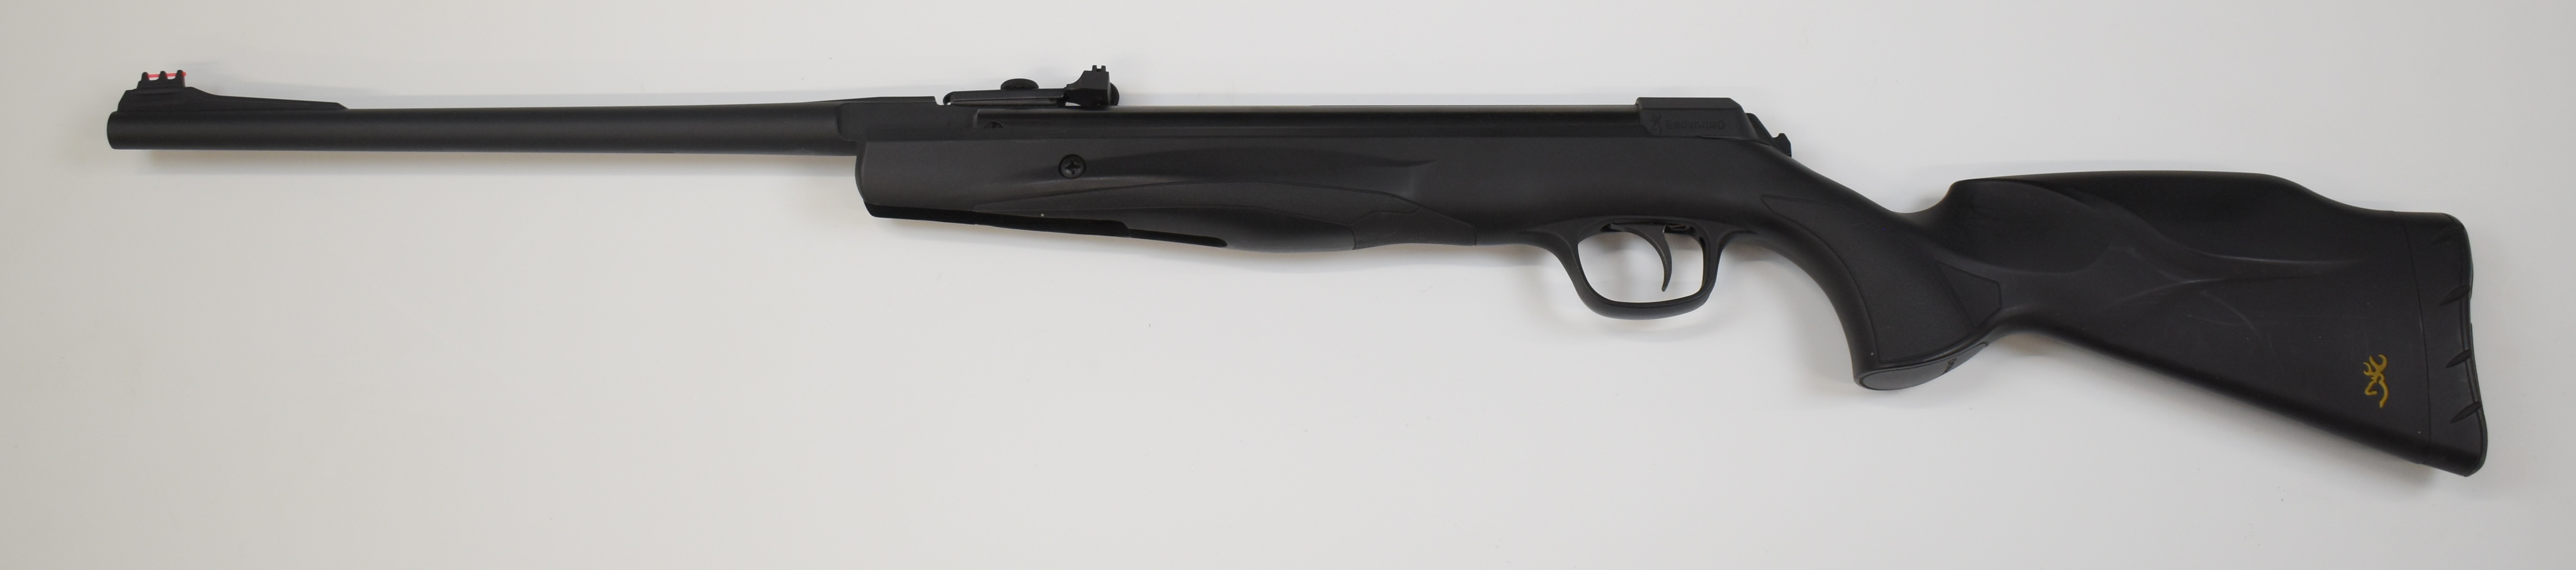 Browning X-Blade II .22 air rifle with composite stock, textured semi-pistol grip and forend and - Image 6 of 10